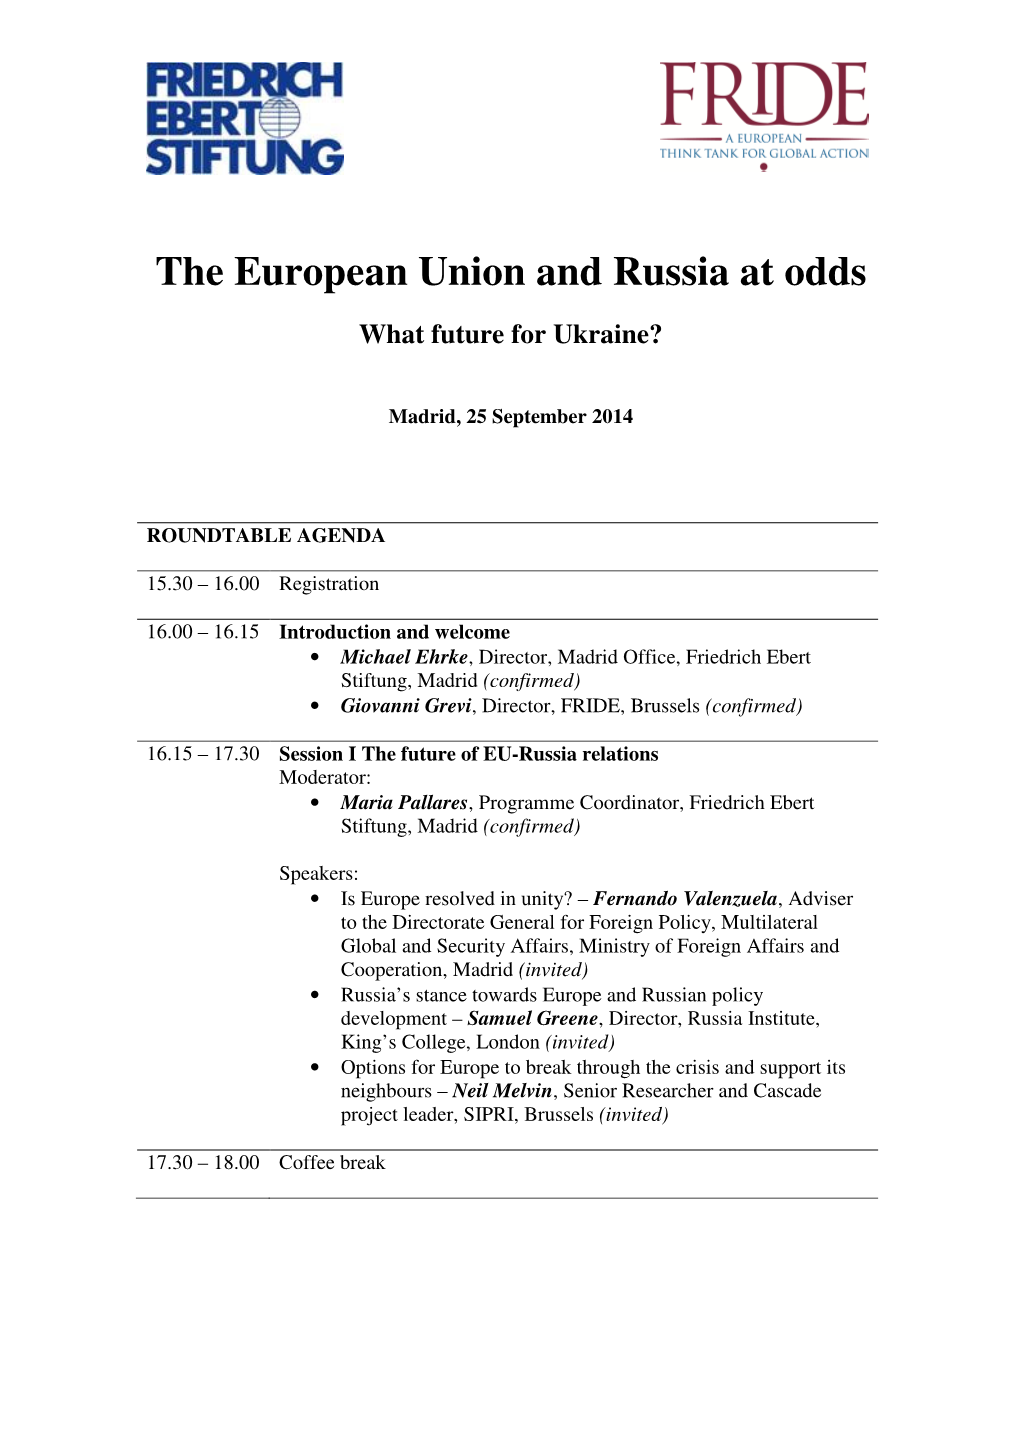 The European Union and Russia at Odds